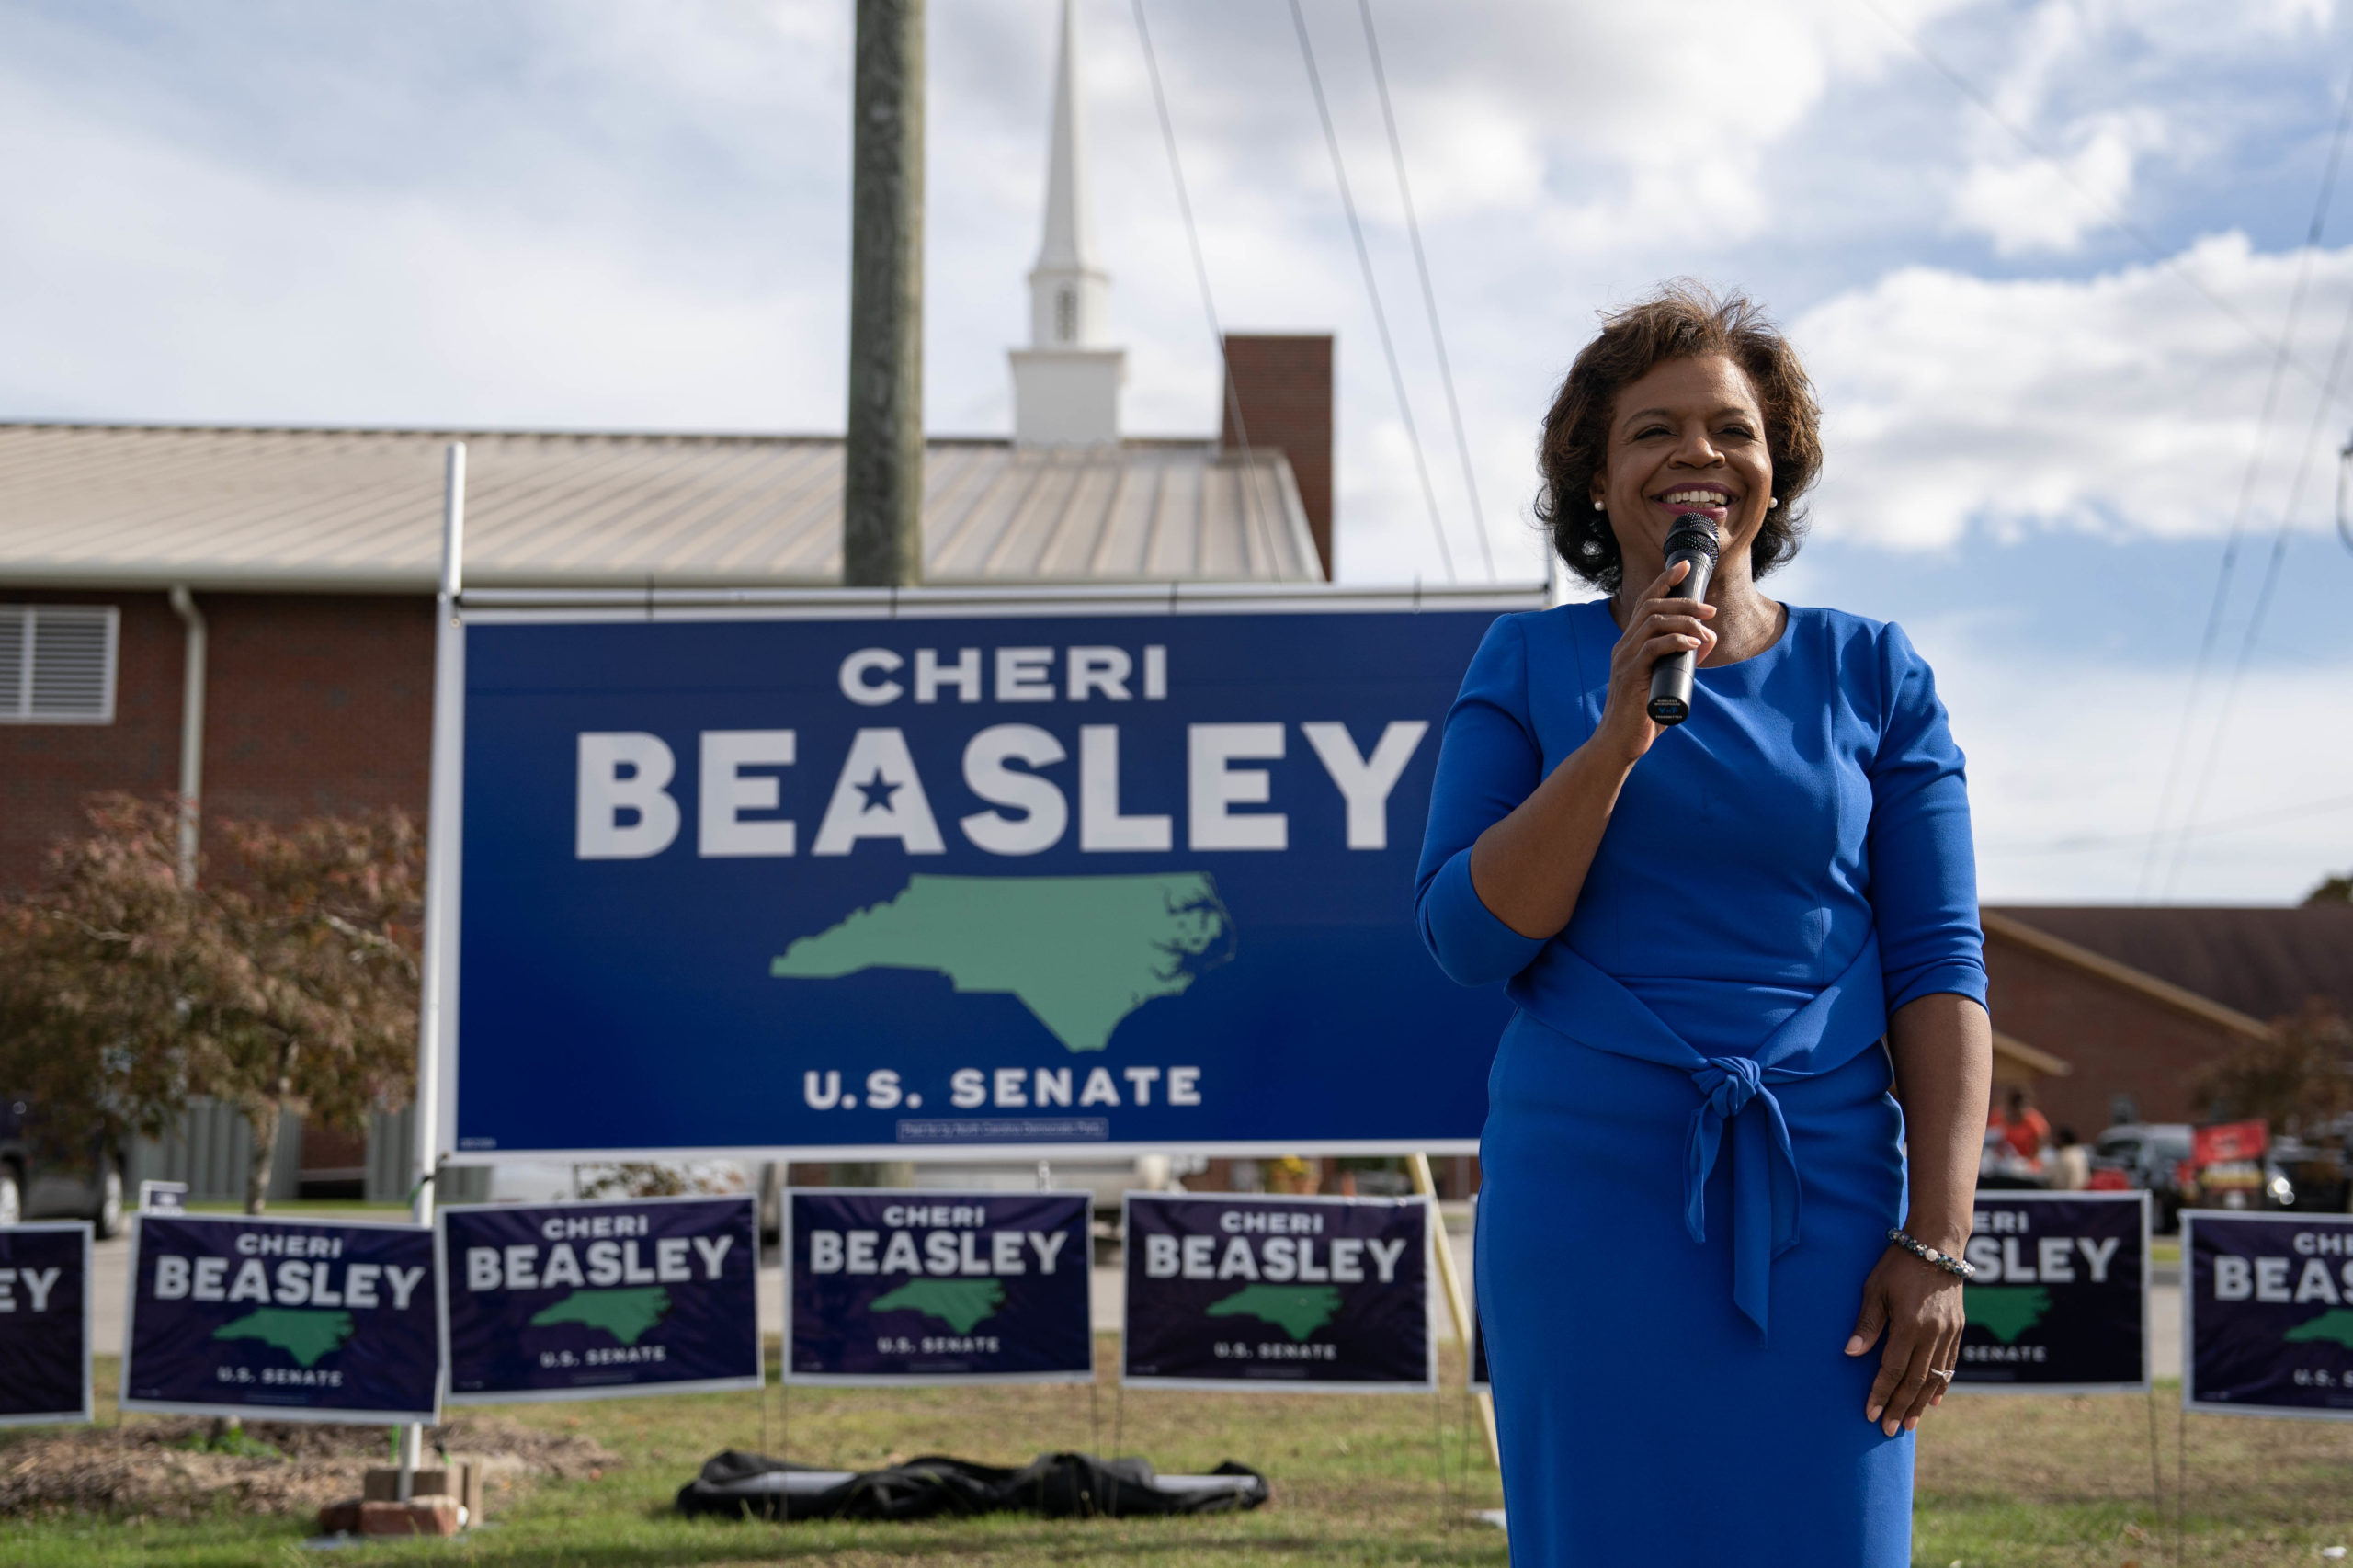 FAYETTEVILLE, NC - NOVEMBER 06: Democratic U.S. Senate candidate Cheri Beasley speaks to supporters at the Cumberland County Cookout and Canvass Launch event on November 6, 2022 in Fayetteville, North Carolina. Beasley faces U.S. Rep. Ted Budd (R-NC) in the November general election, which will be held on November 8th. (Photo by Allison Joyce/Getty Images)